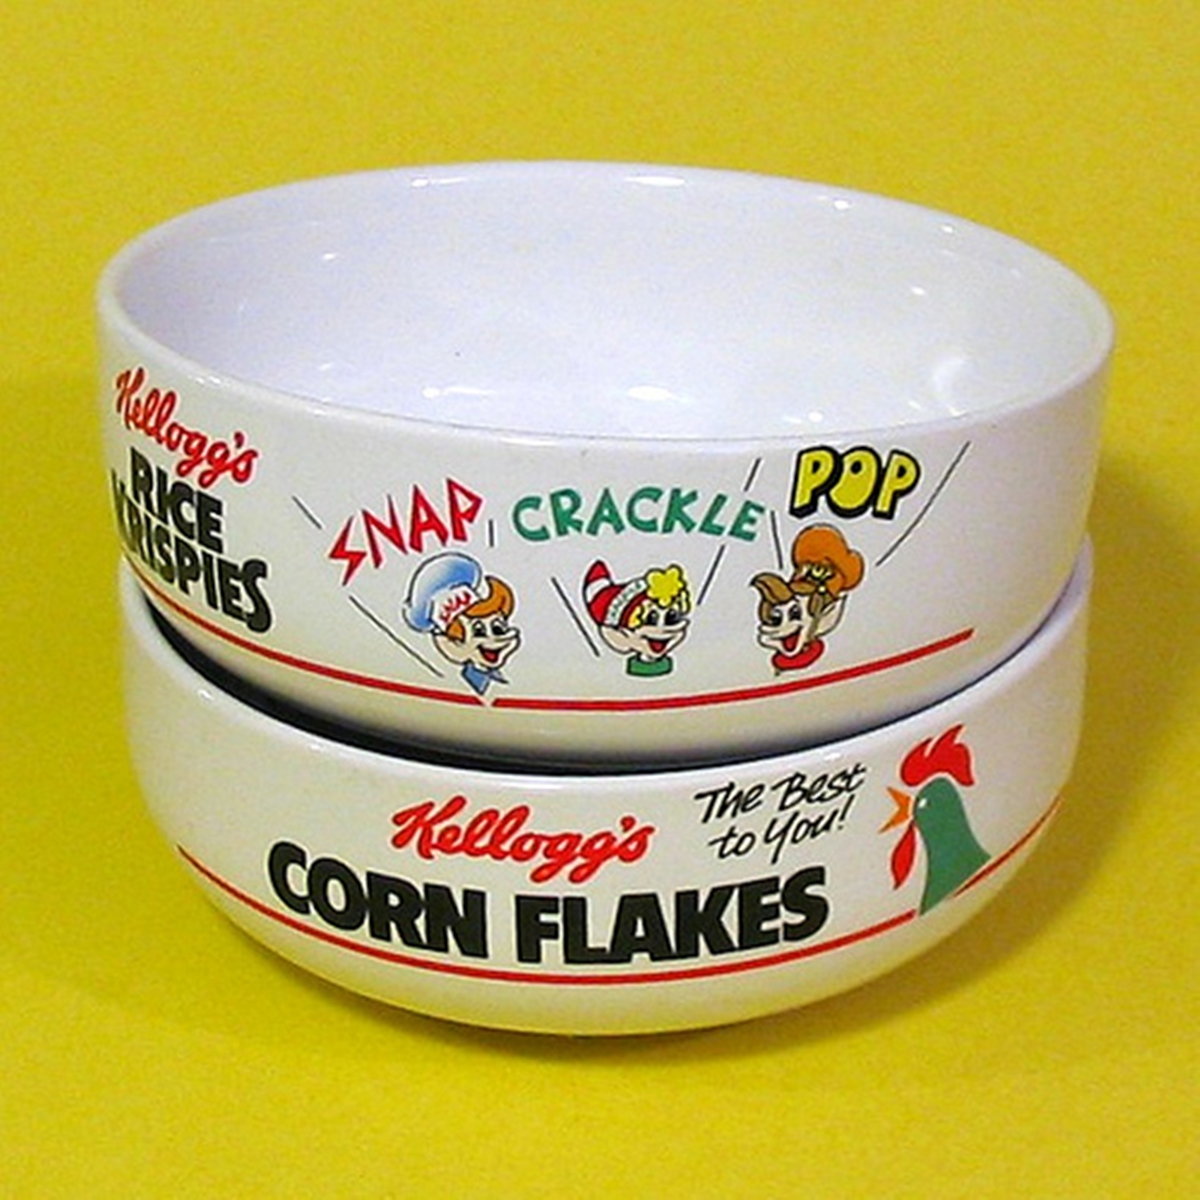 kelloggs cereal bowl - Logo' Znap, Crackle Pop Kellogg's The People to you! Corn Flakes